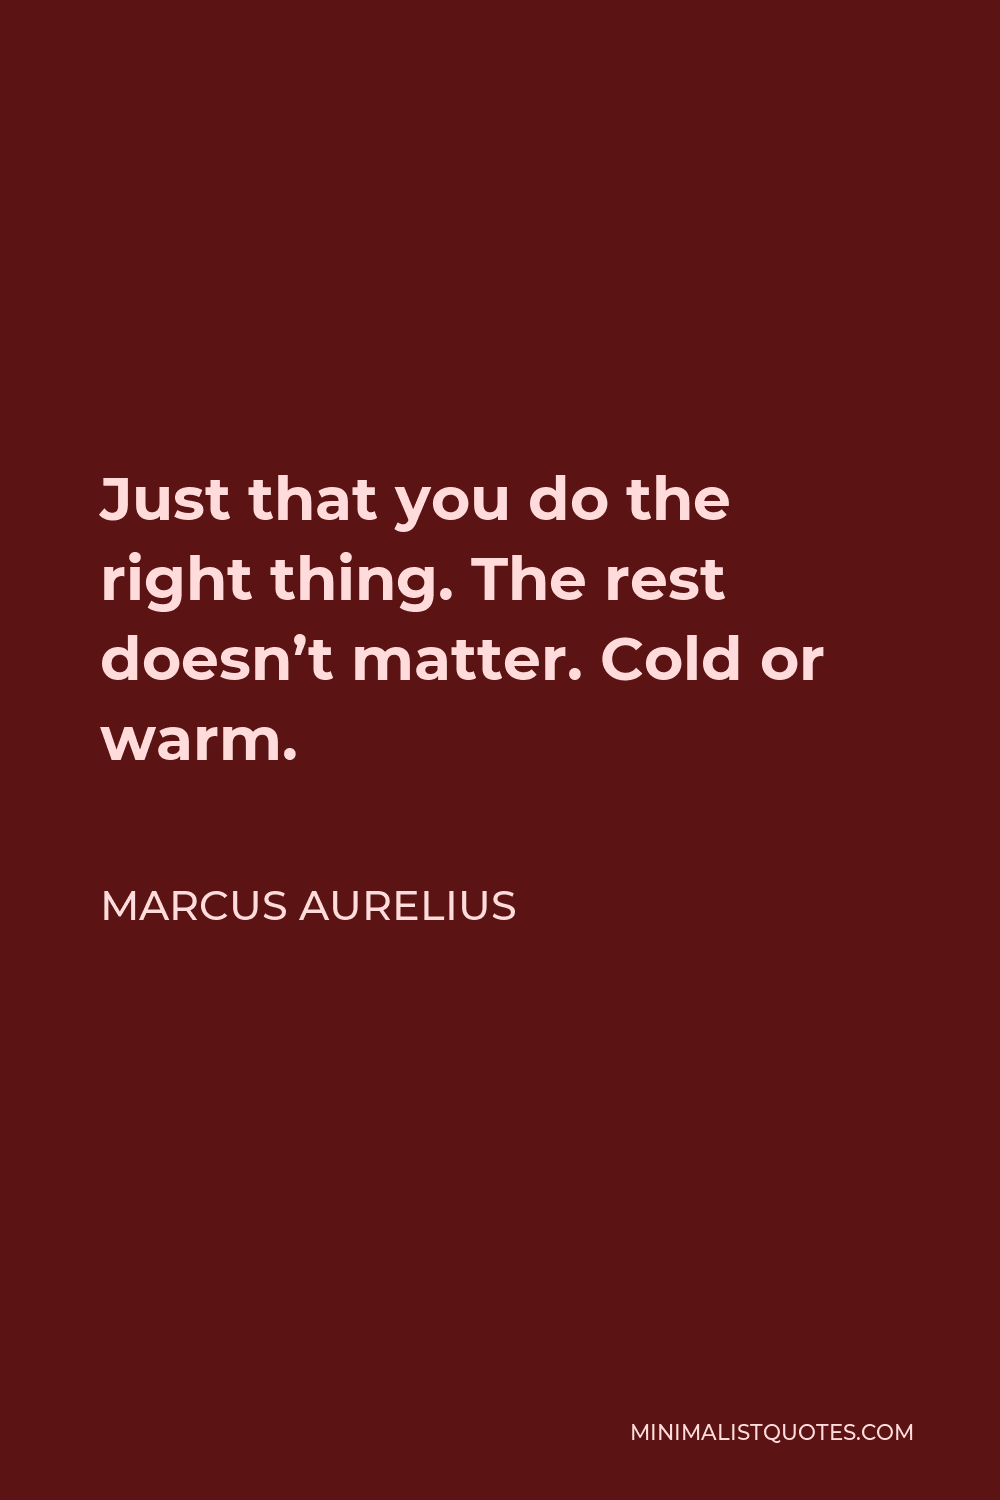 Marcus Aurelius Quote - Just that you do the right thing. The rest doesn’t matter. Cold or warm.